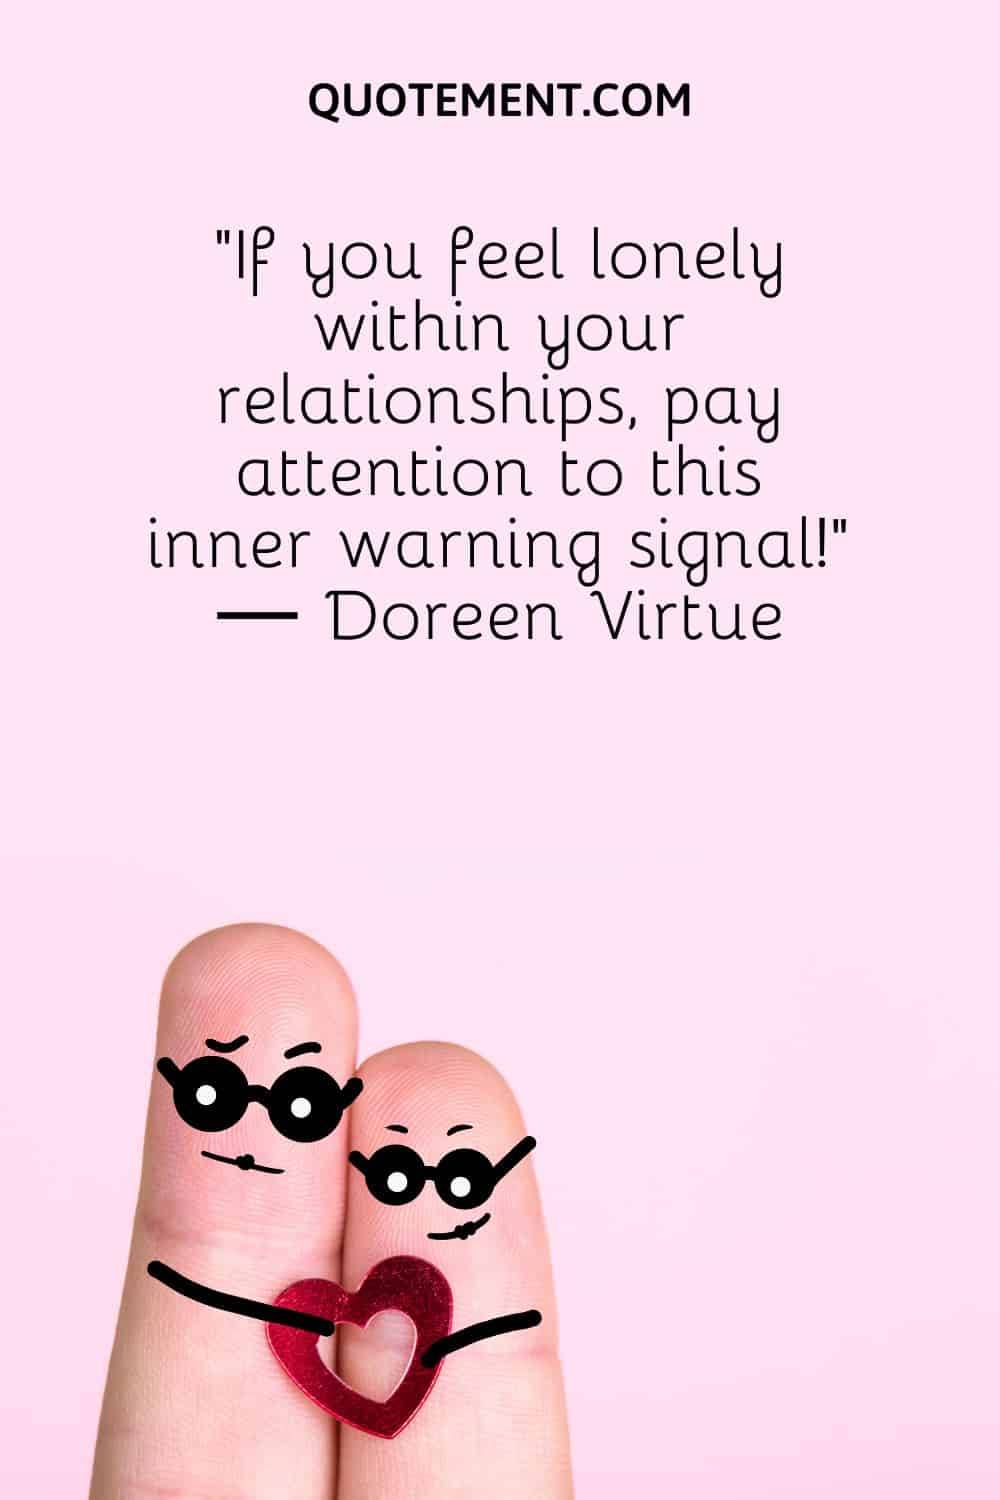 “If you feel lonely within your relationships, pay attention to this inner warning signal!” ― Doreen Virtue